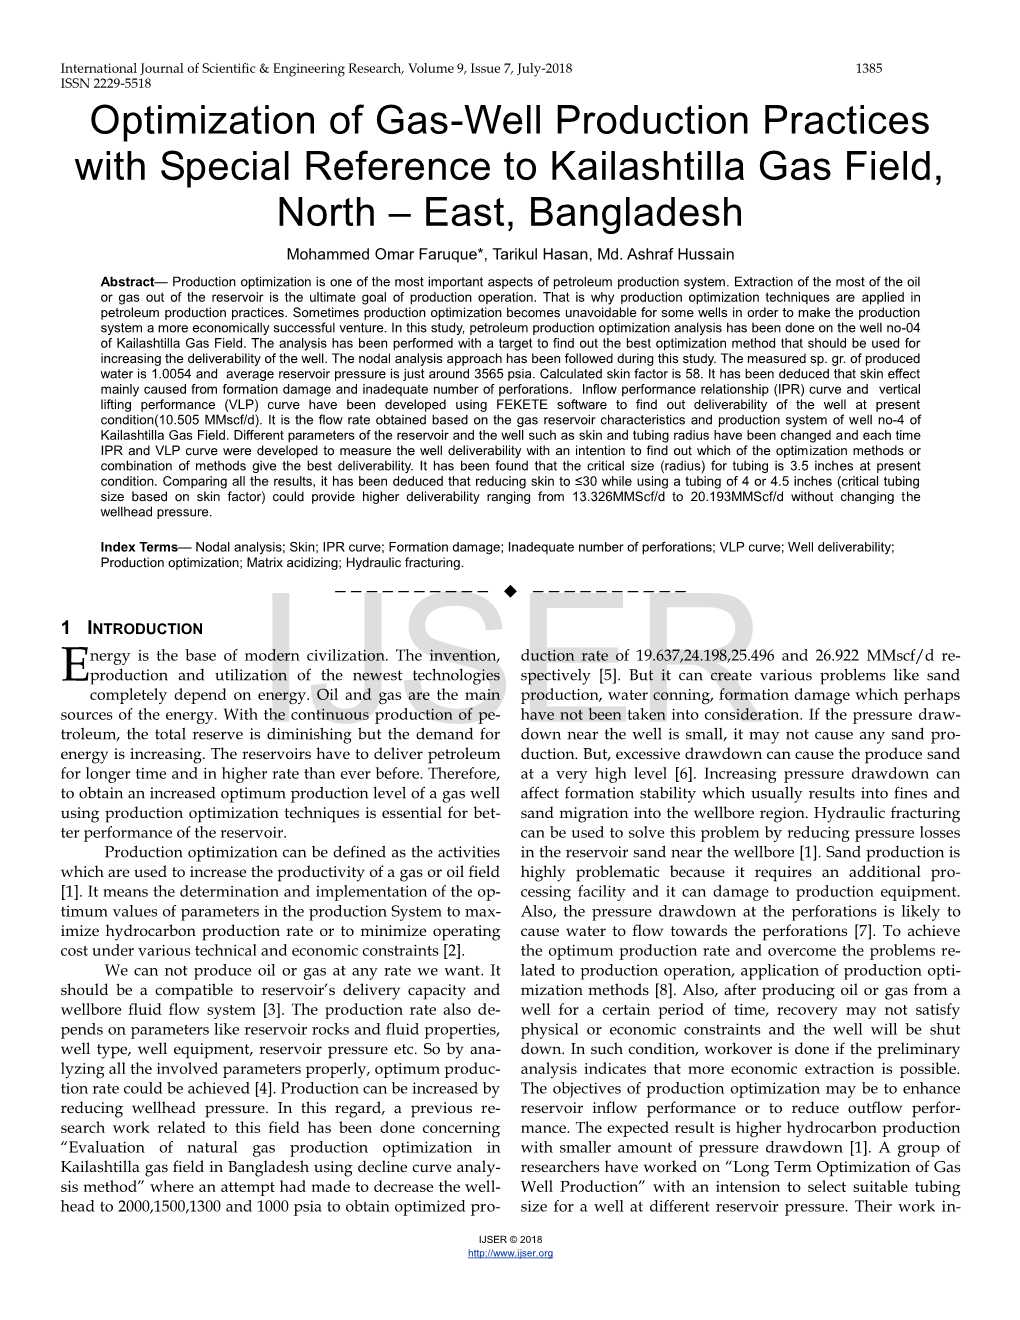 Optimization of Gas-Well Production Practices with Special Reference to Kailashtilla Gas Field, North – East, Bangladesh Mohammed Omar Faruque*, Tarikul Hasan, Md